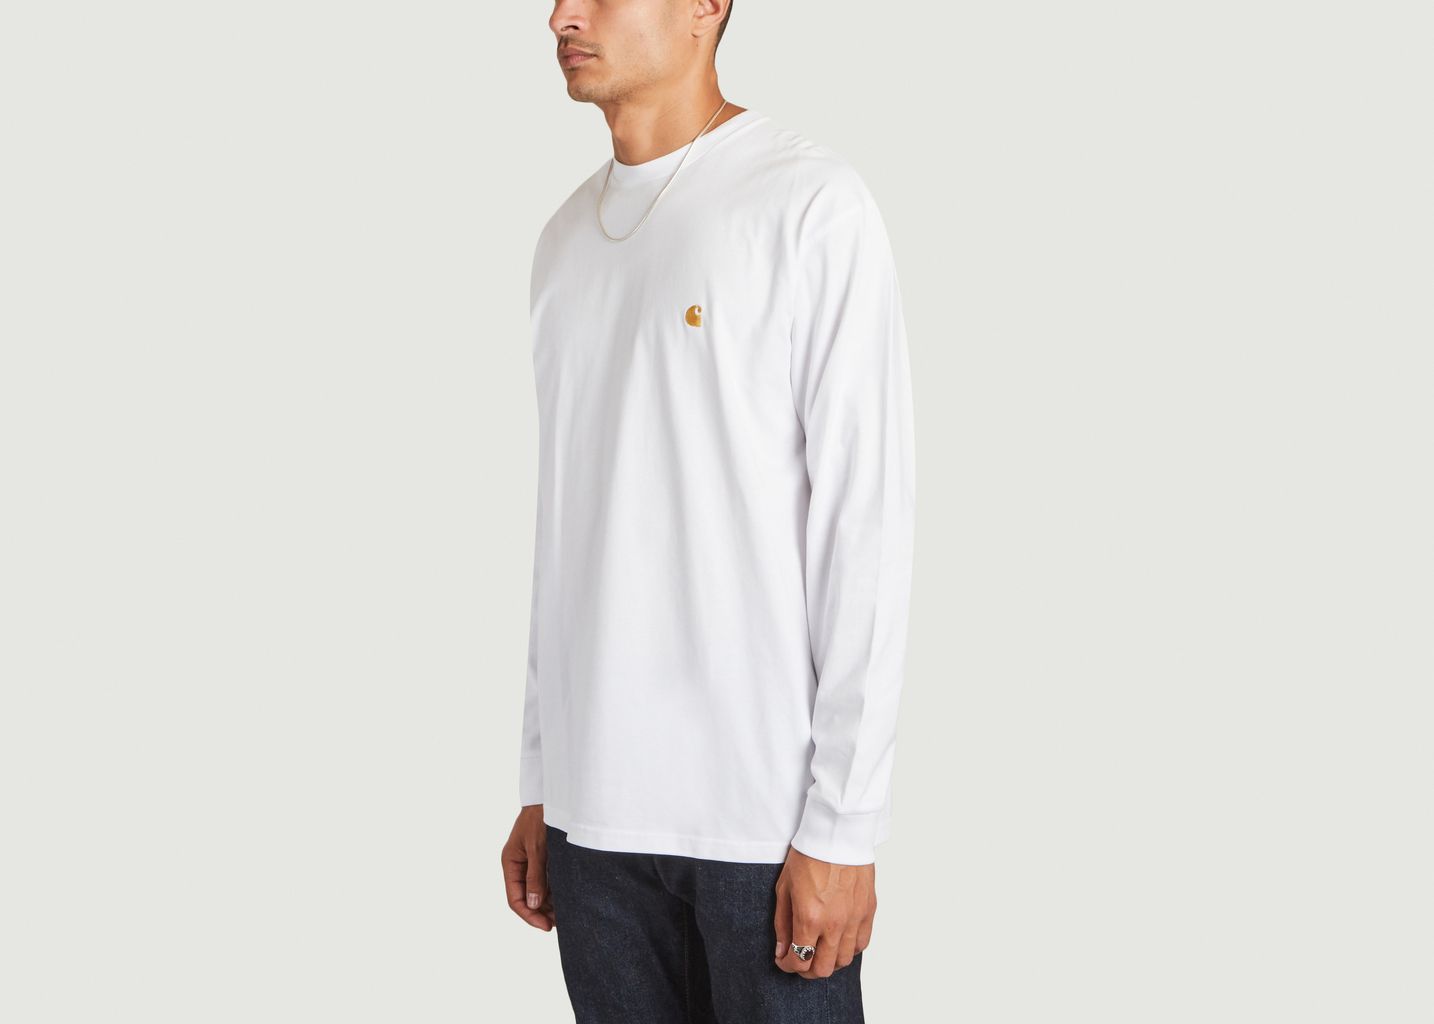 LS Chase Cotton T-Shirt - Carhartt WIP